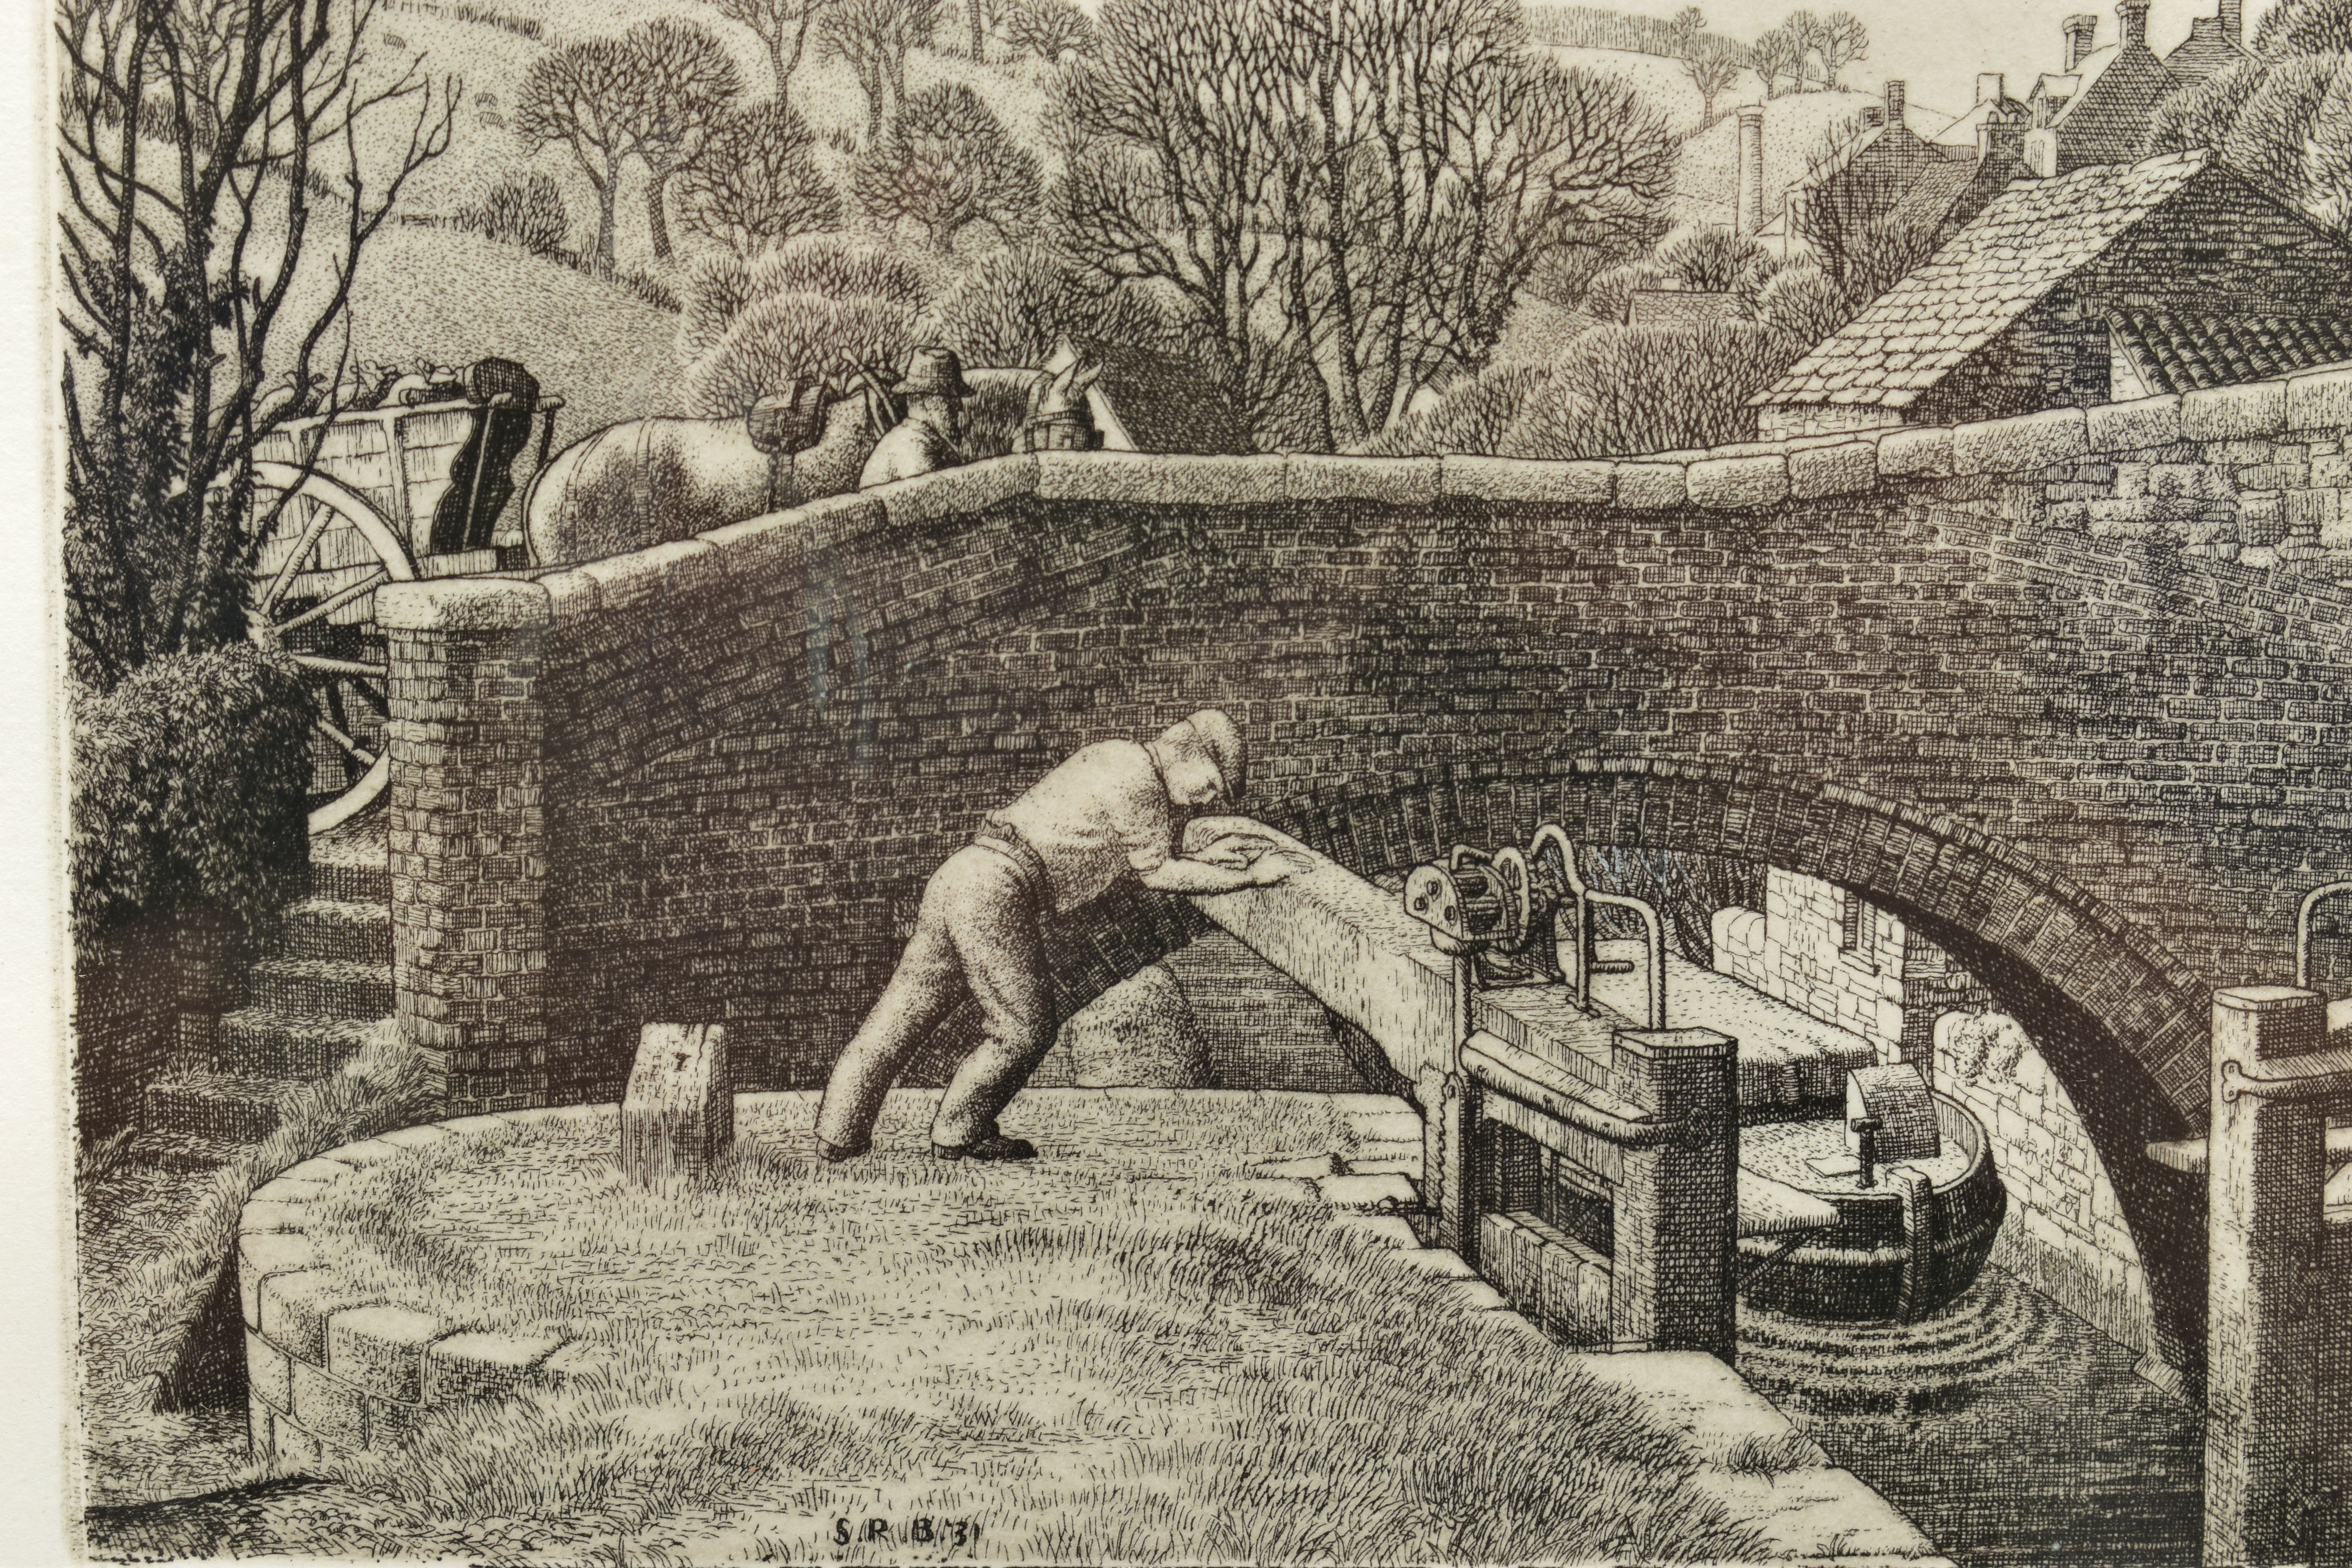 STANLEY ROY BADMIN (BRITISH 1906-1989) 'THE STROUD CANAL', an etching depicting a figure opening a - Image 3 of 5